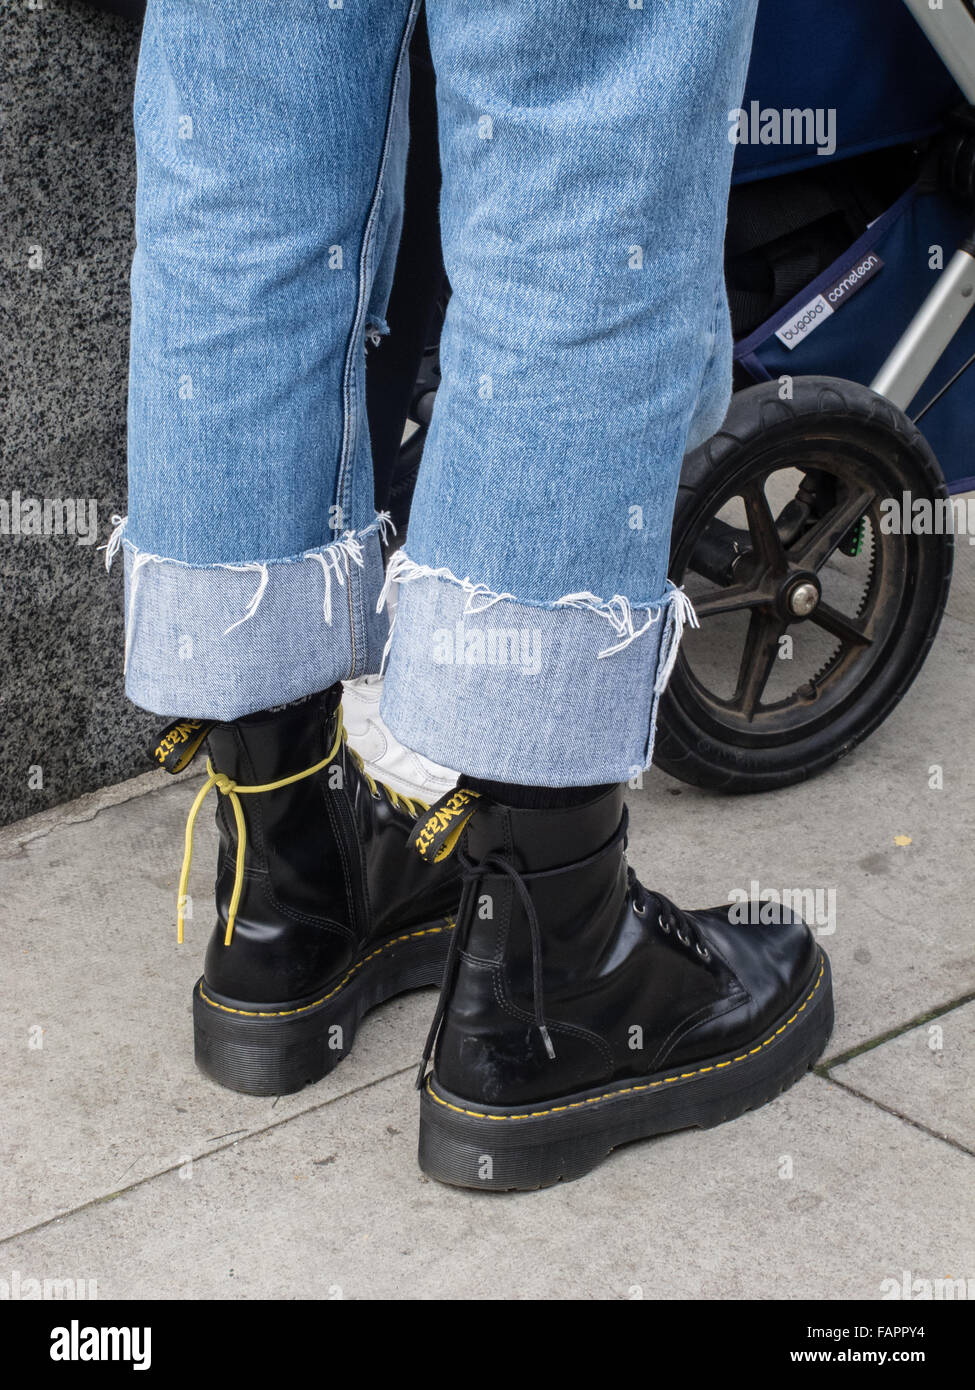 doc martens and jeans